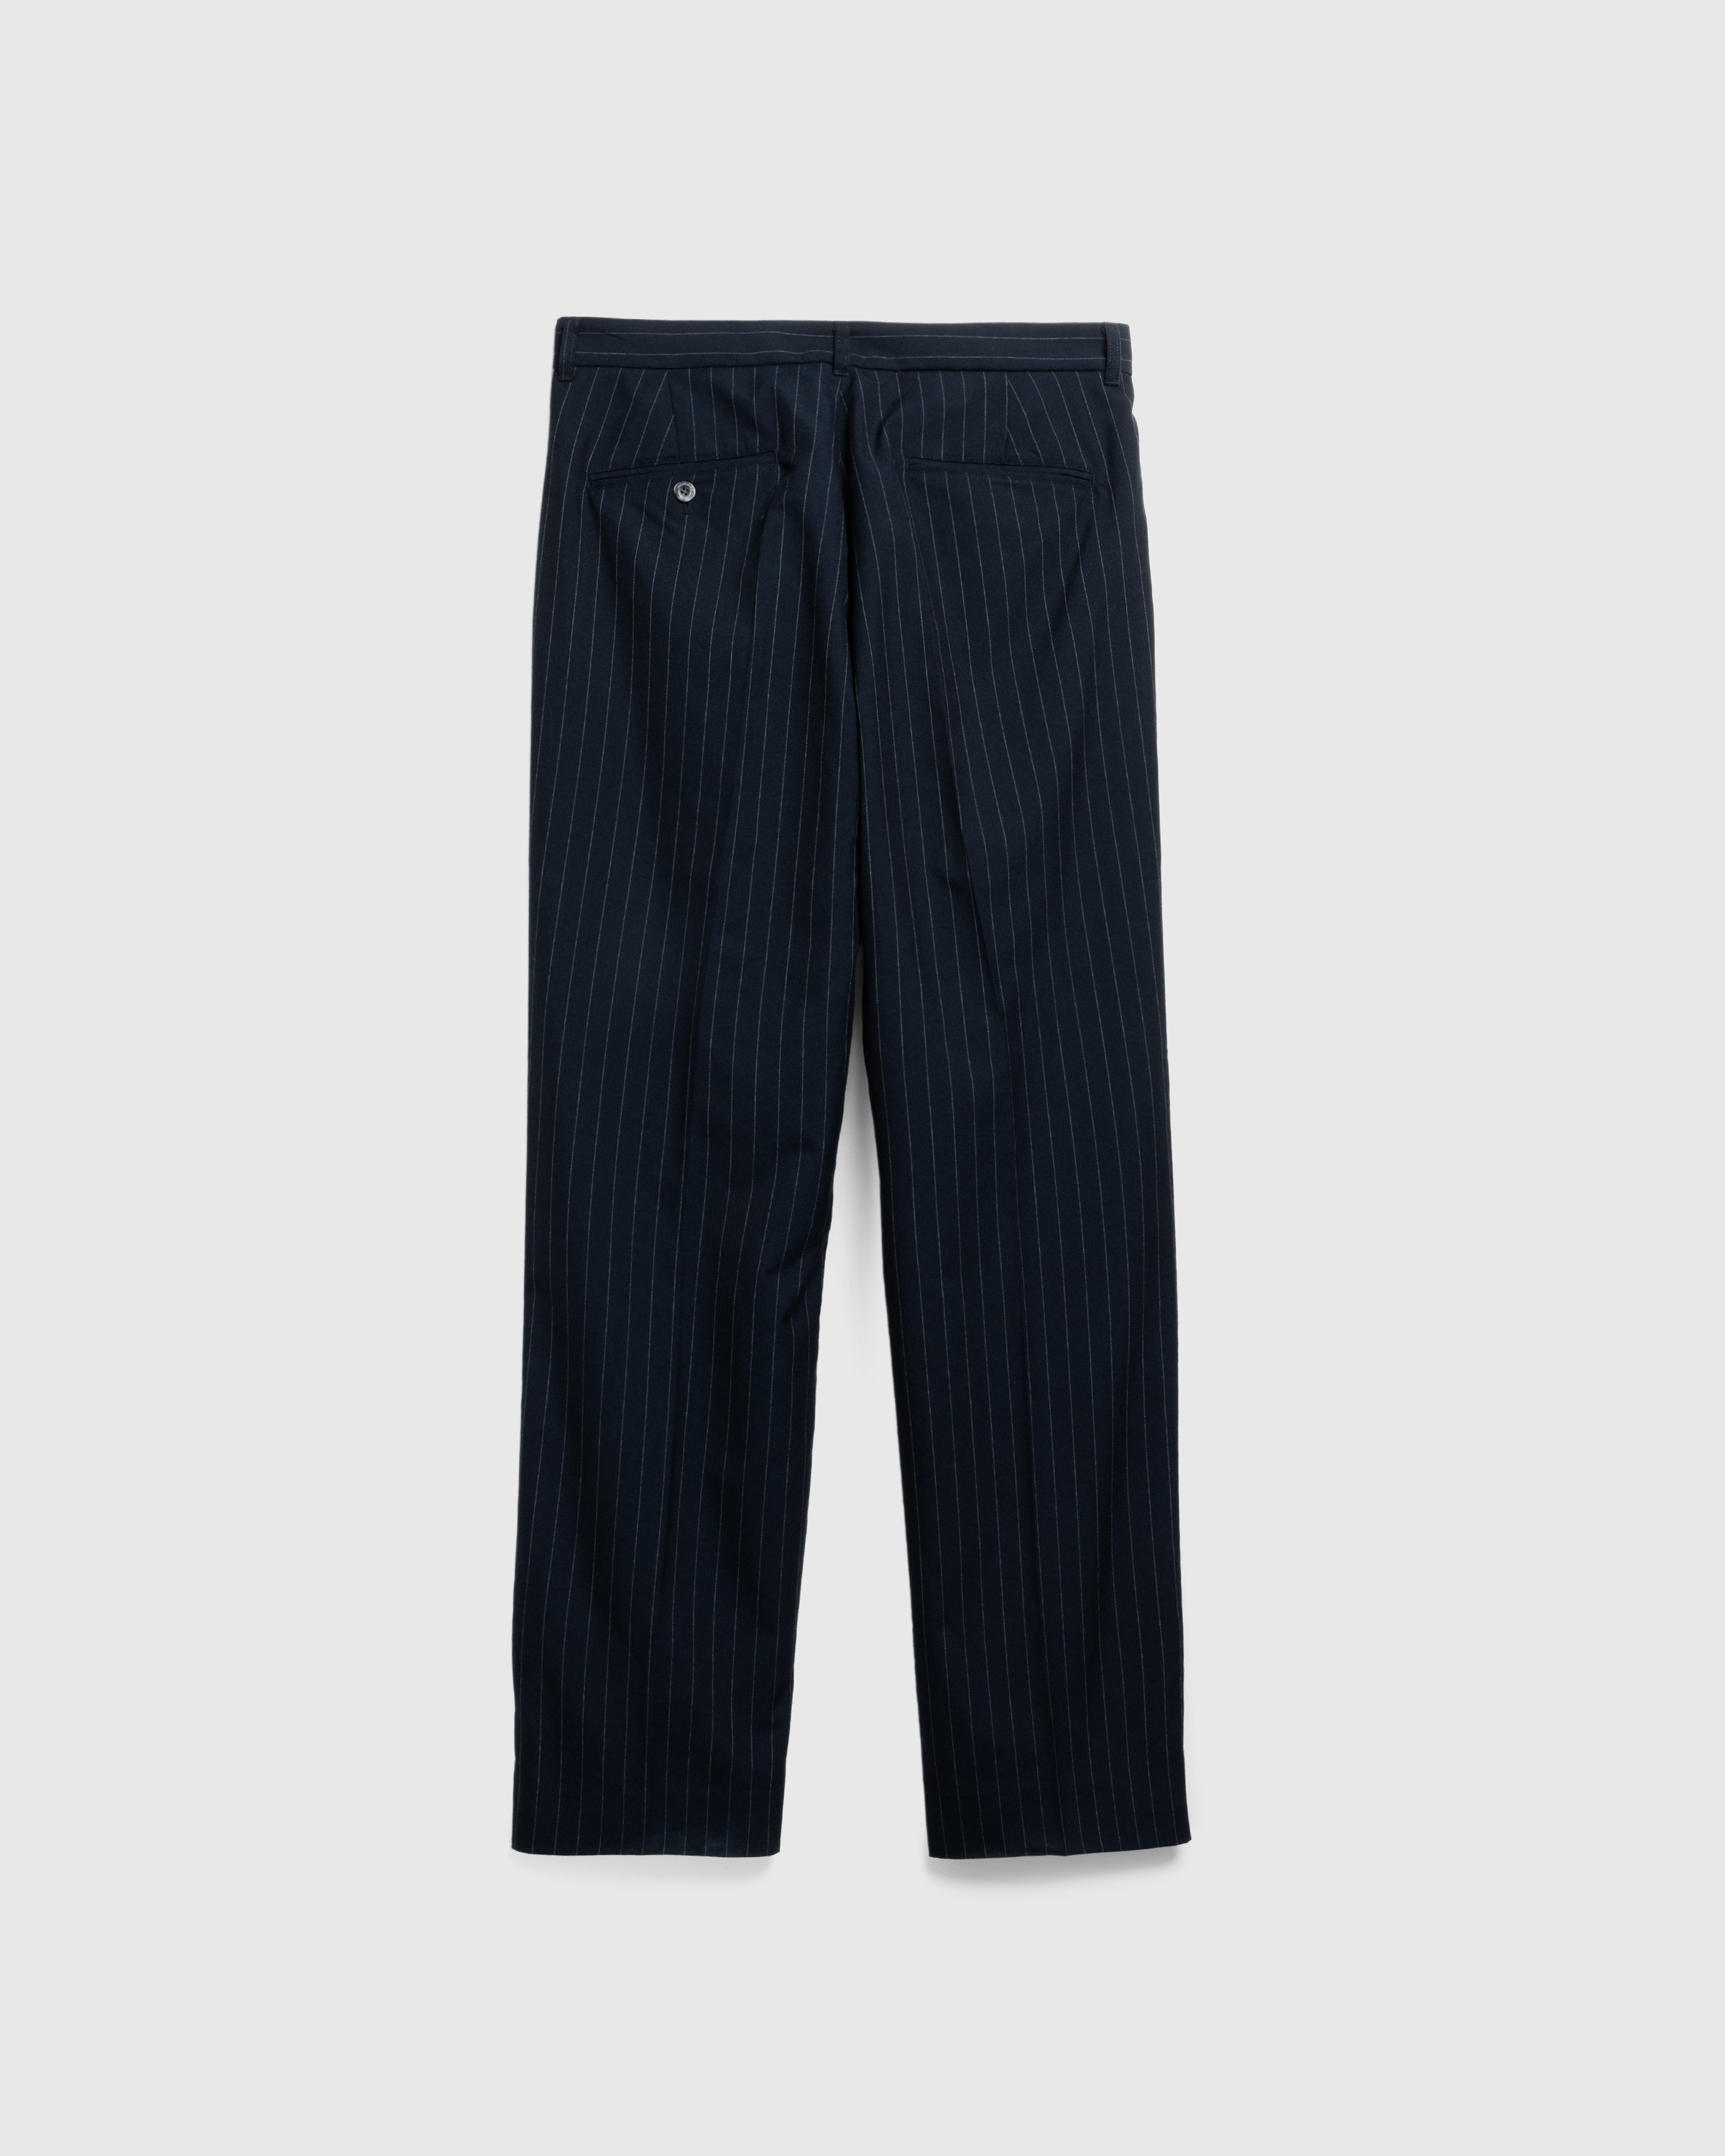 Highsnobiety HS05 - Tropical Suiting Pants Navy Striped - Clothing - Navy Striped - Image 2